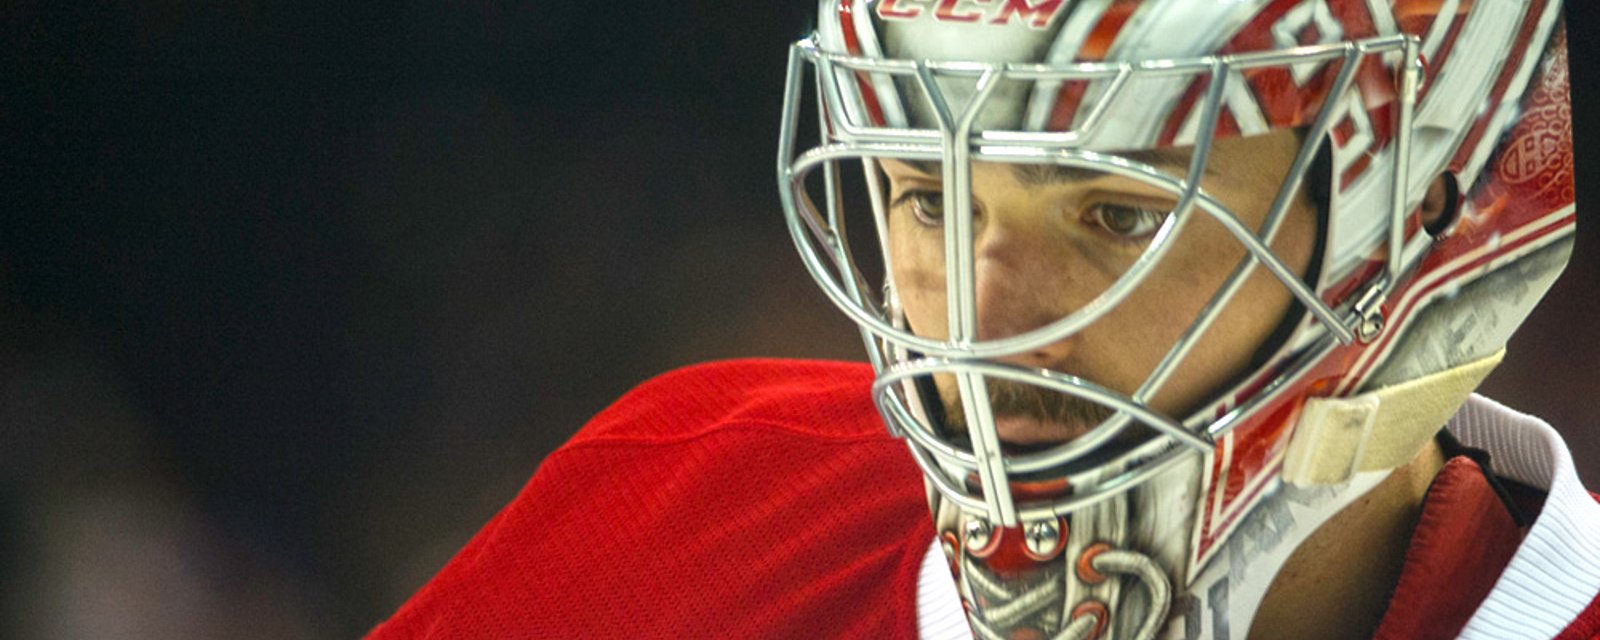 CAREY PRICE IS BACK!